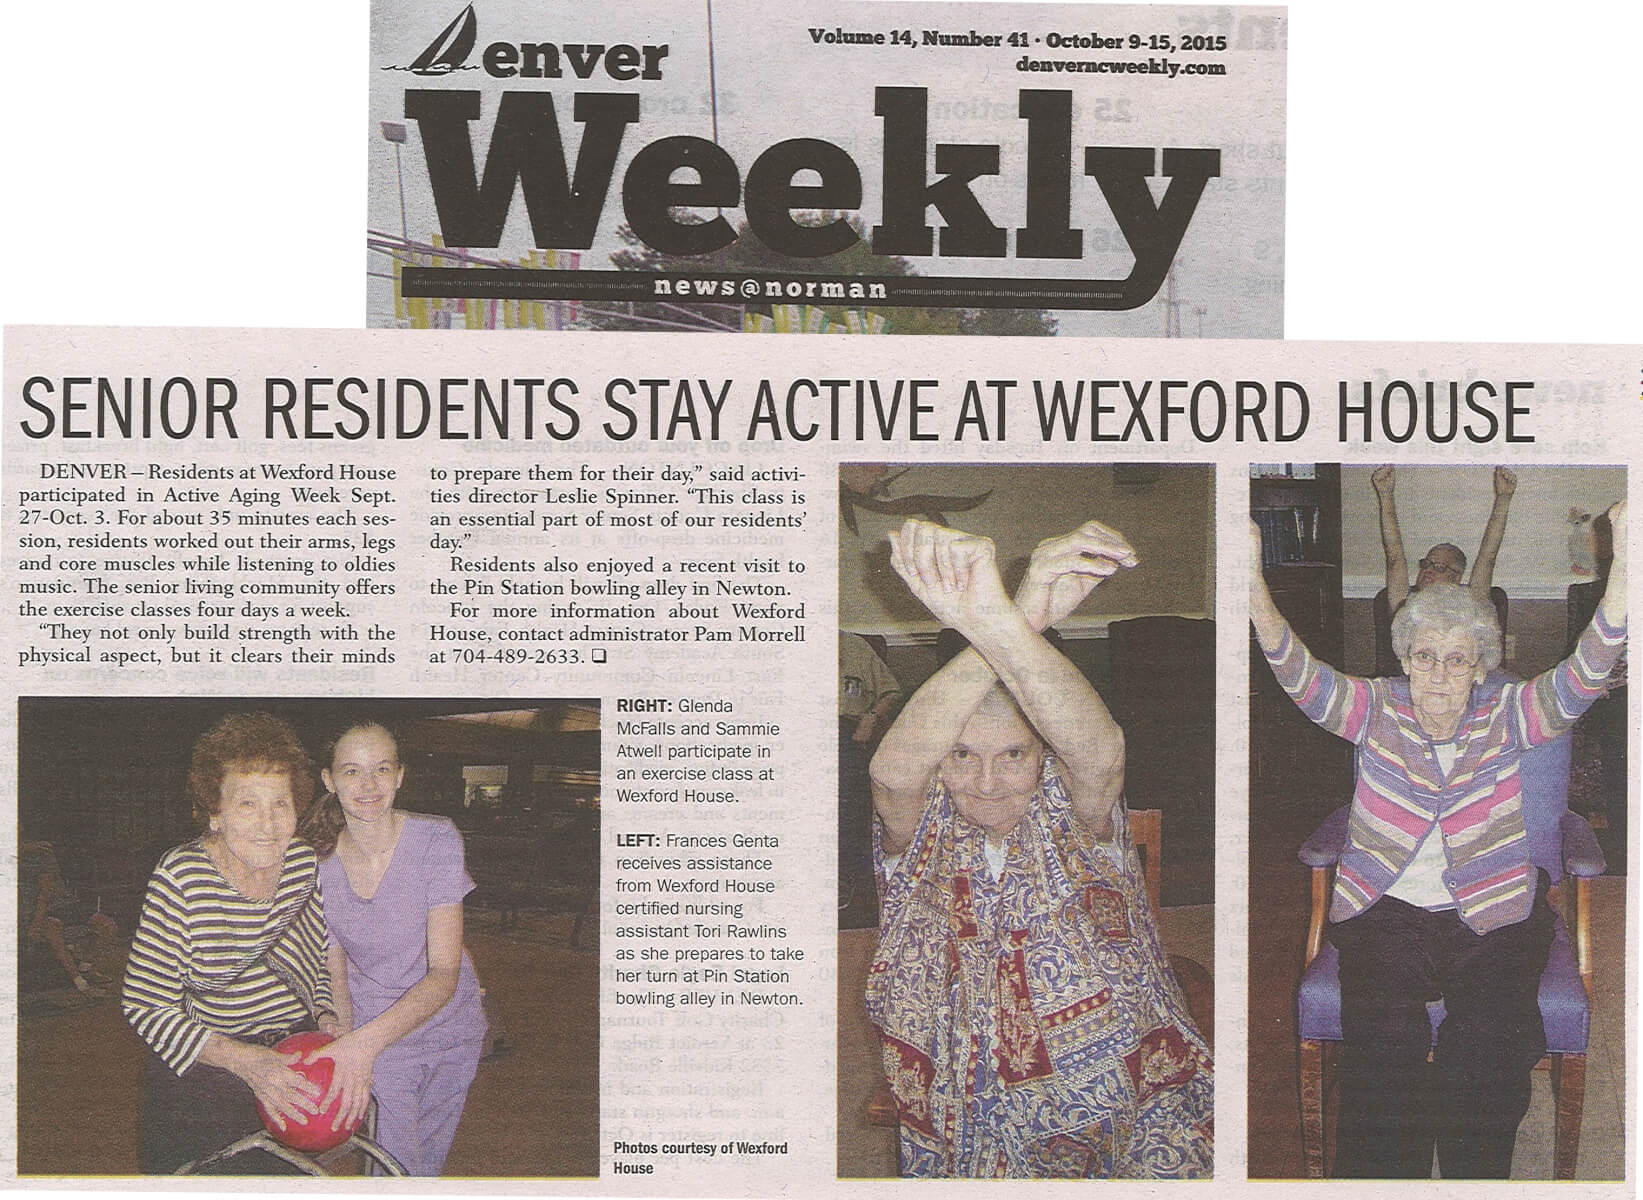 Wexford House Residents Active Aging story in the Denver Weekly October 2015